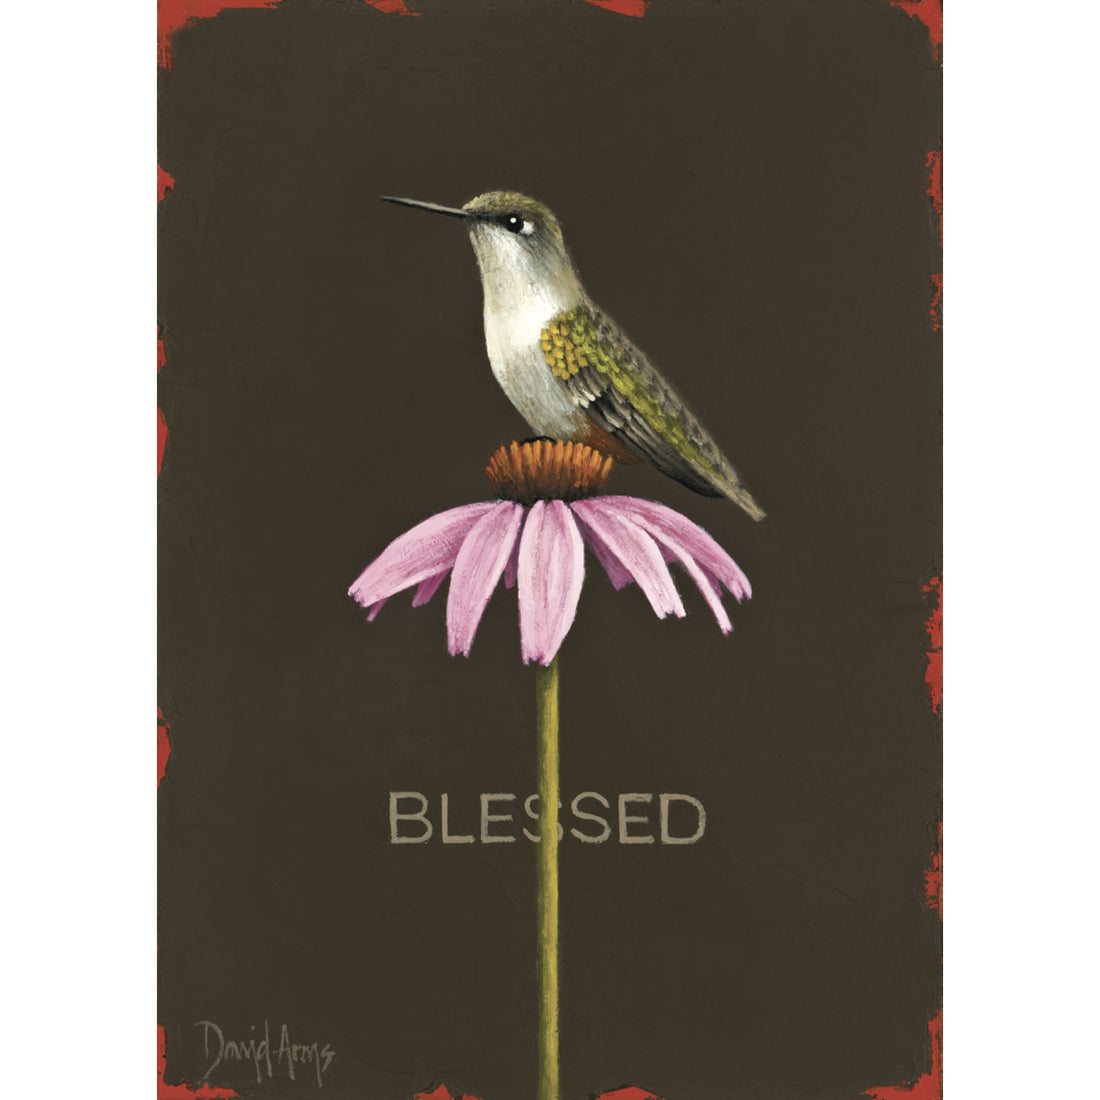 An illustration of a green and white hummingbird resting on a purple flower over a dark brown background, with &quot;BLESSED&quot; printed in light tan behind the flower.